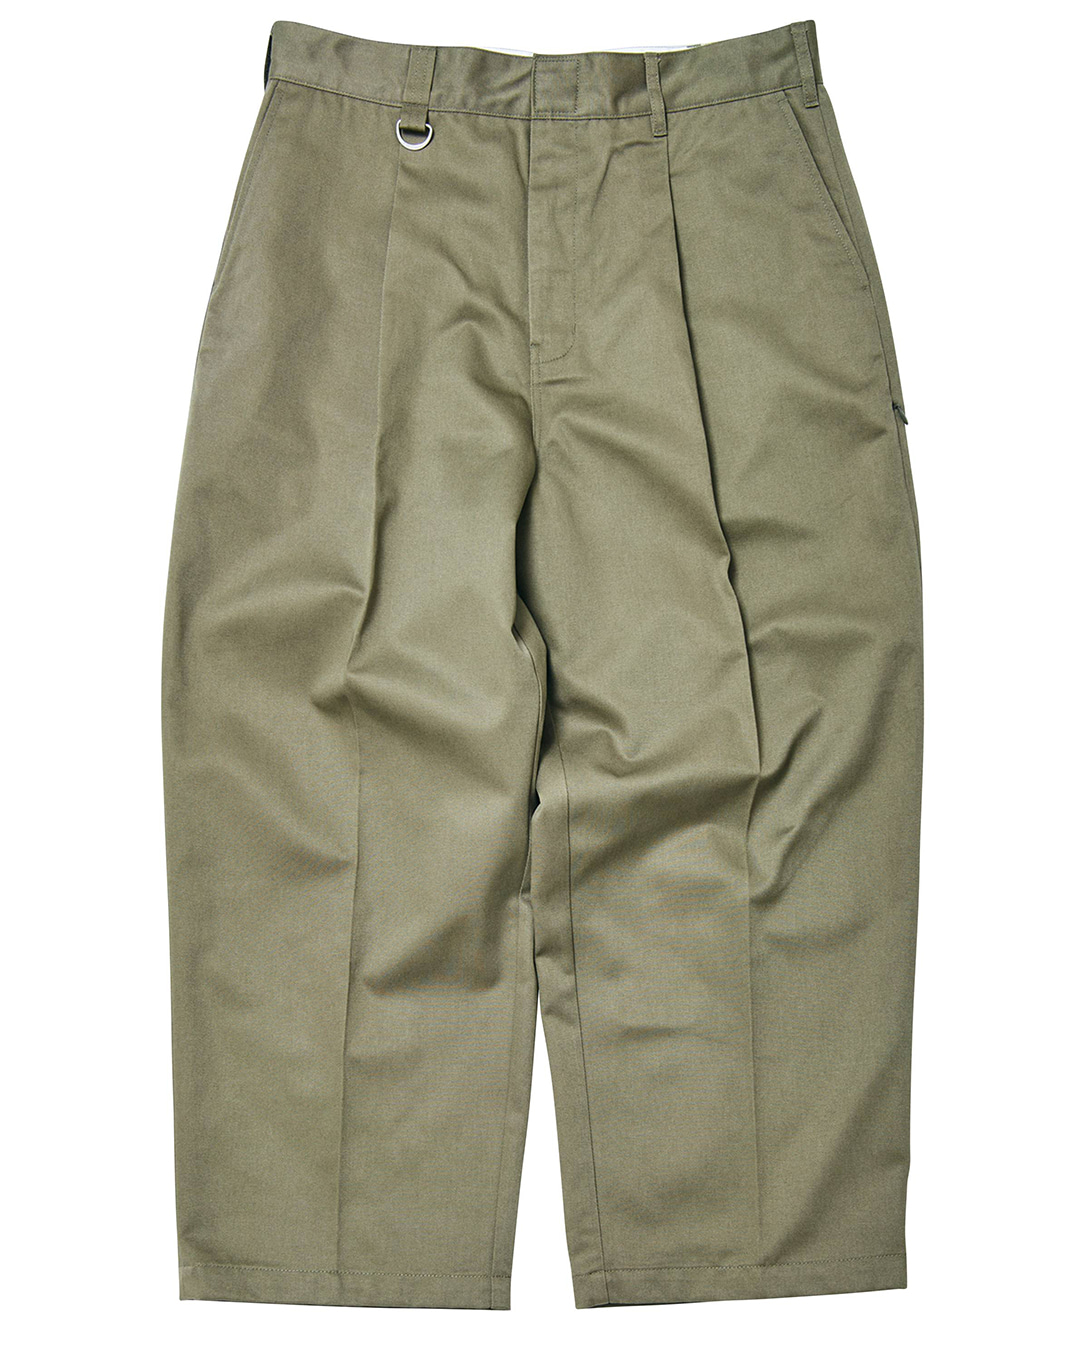 LIBERE X DICKIES WIDE EASY WORK PANTS/OLIVE,BTS,JAPAN,FASHIONBRAND,LIBERE